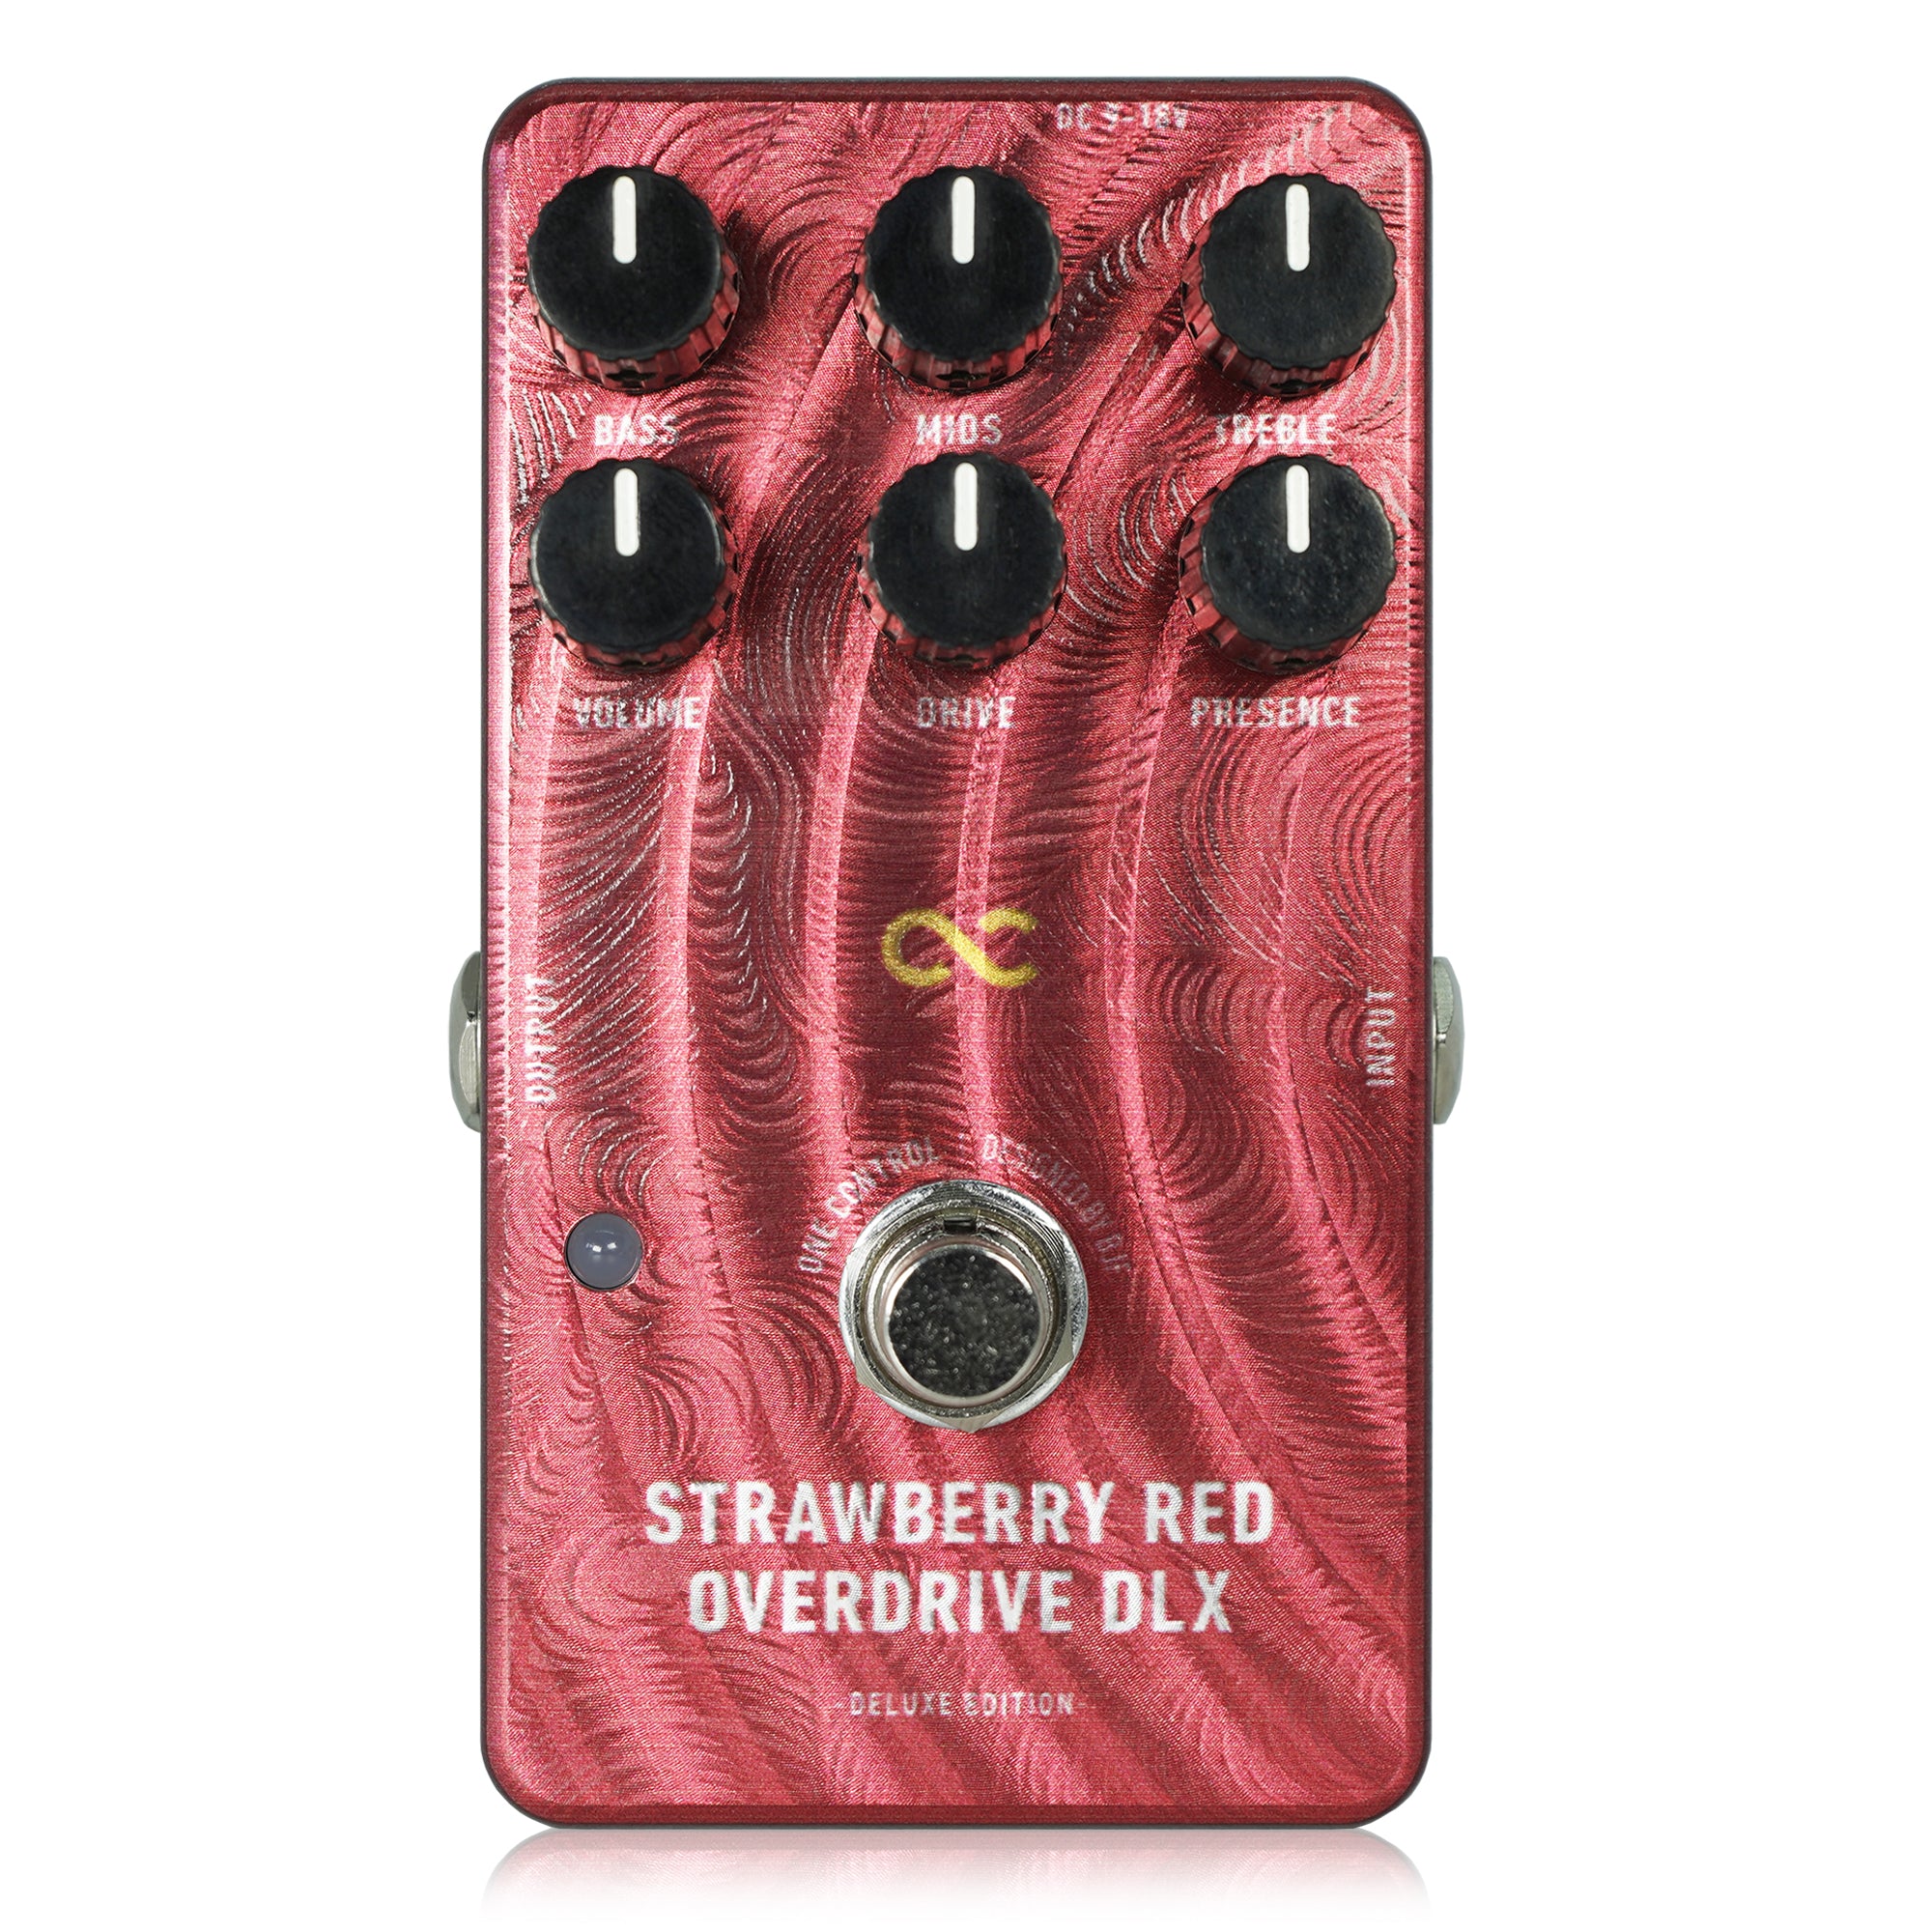 One Control Strawberry Red Over Drive